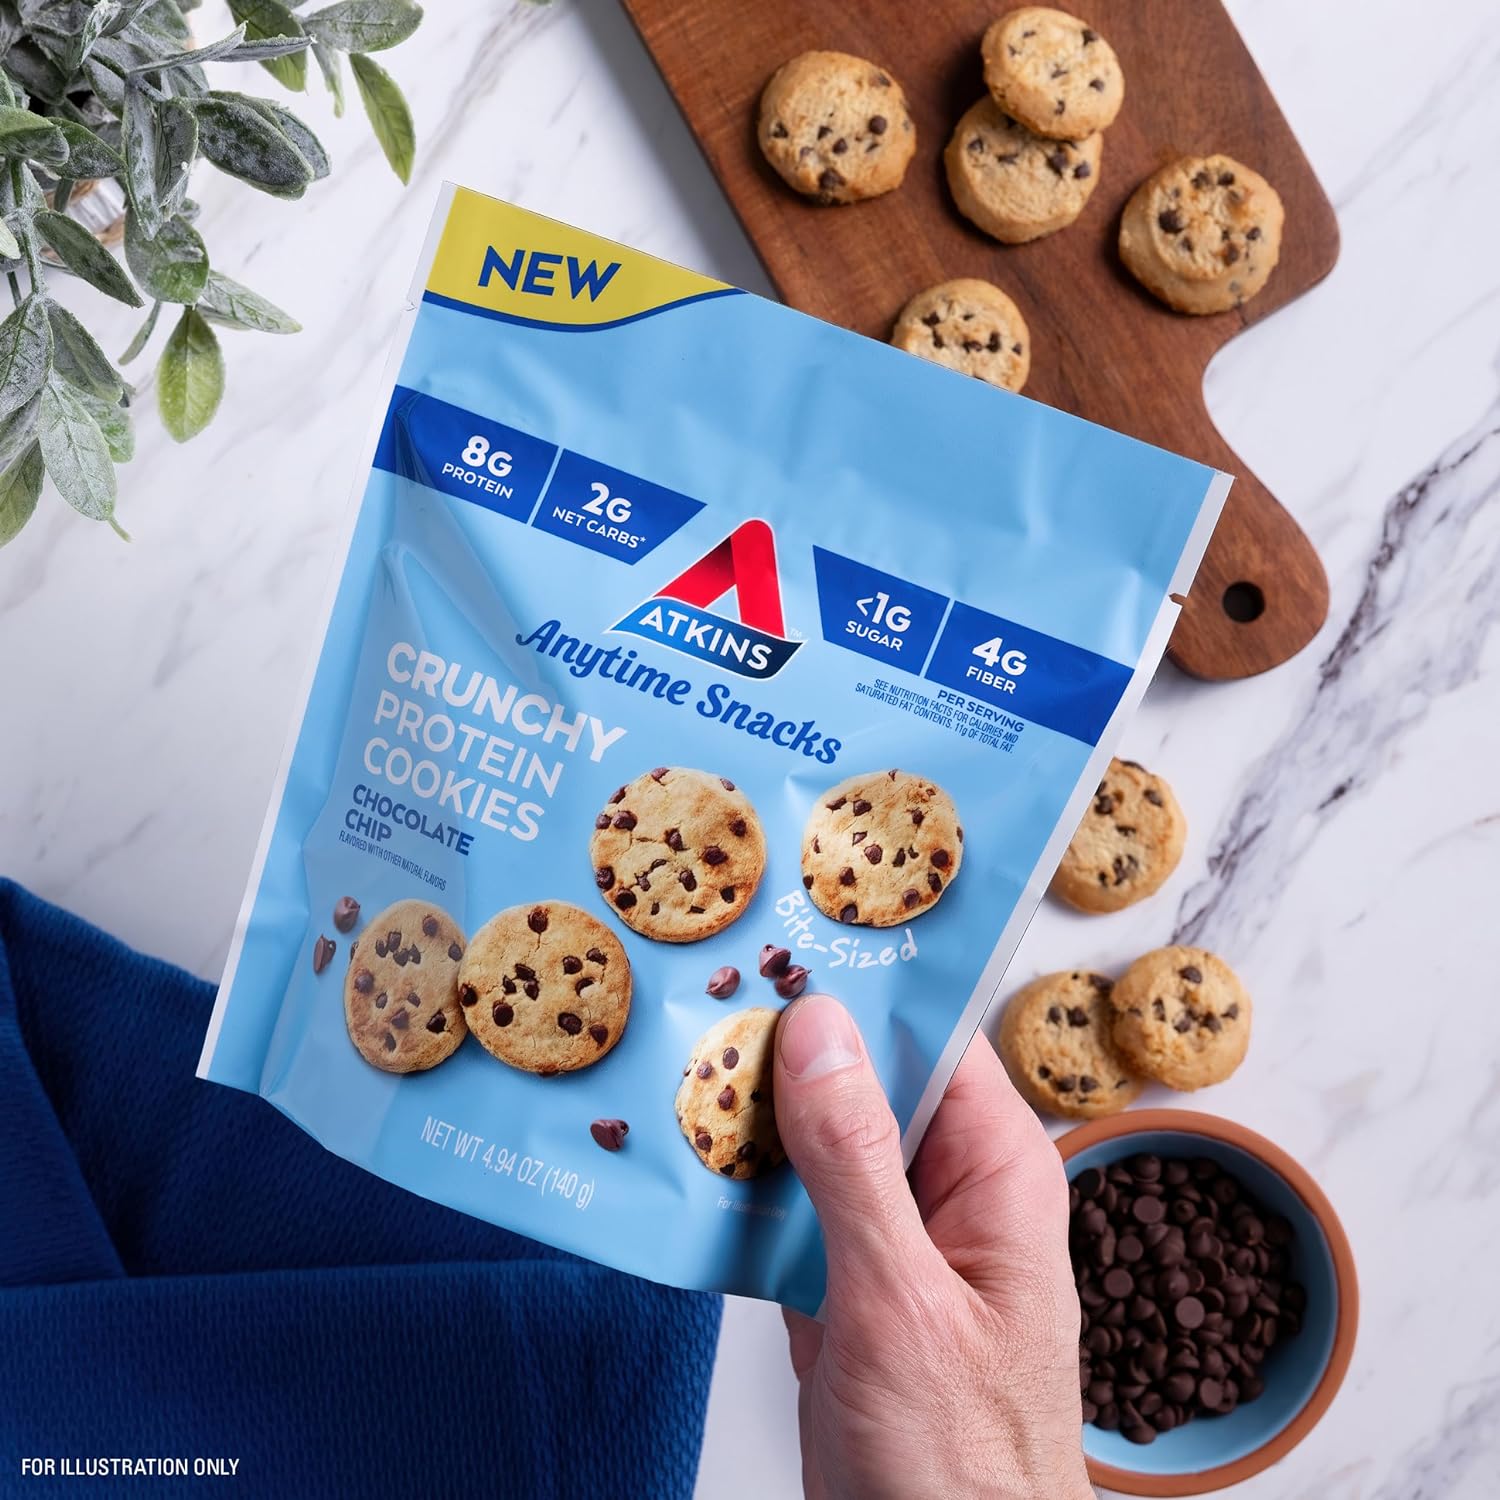 Atkins Bite-Sized Crunchy Protein Cookies, Chocolate Chip, 8g Protein, 4g Fiber, 1g Net Carb, 1g Sugar, Keto Friendly, 3 Bags (5 Servings Per Bag) : Everything Else